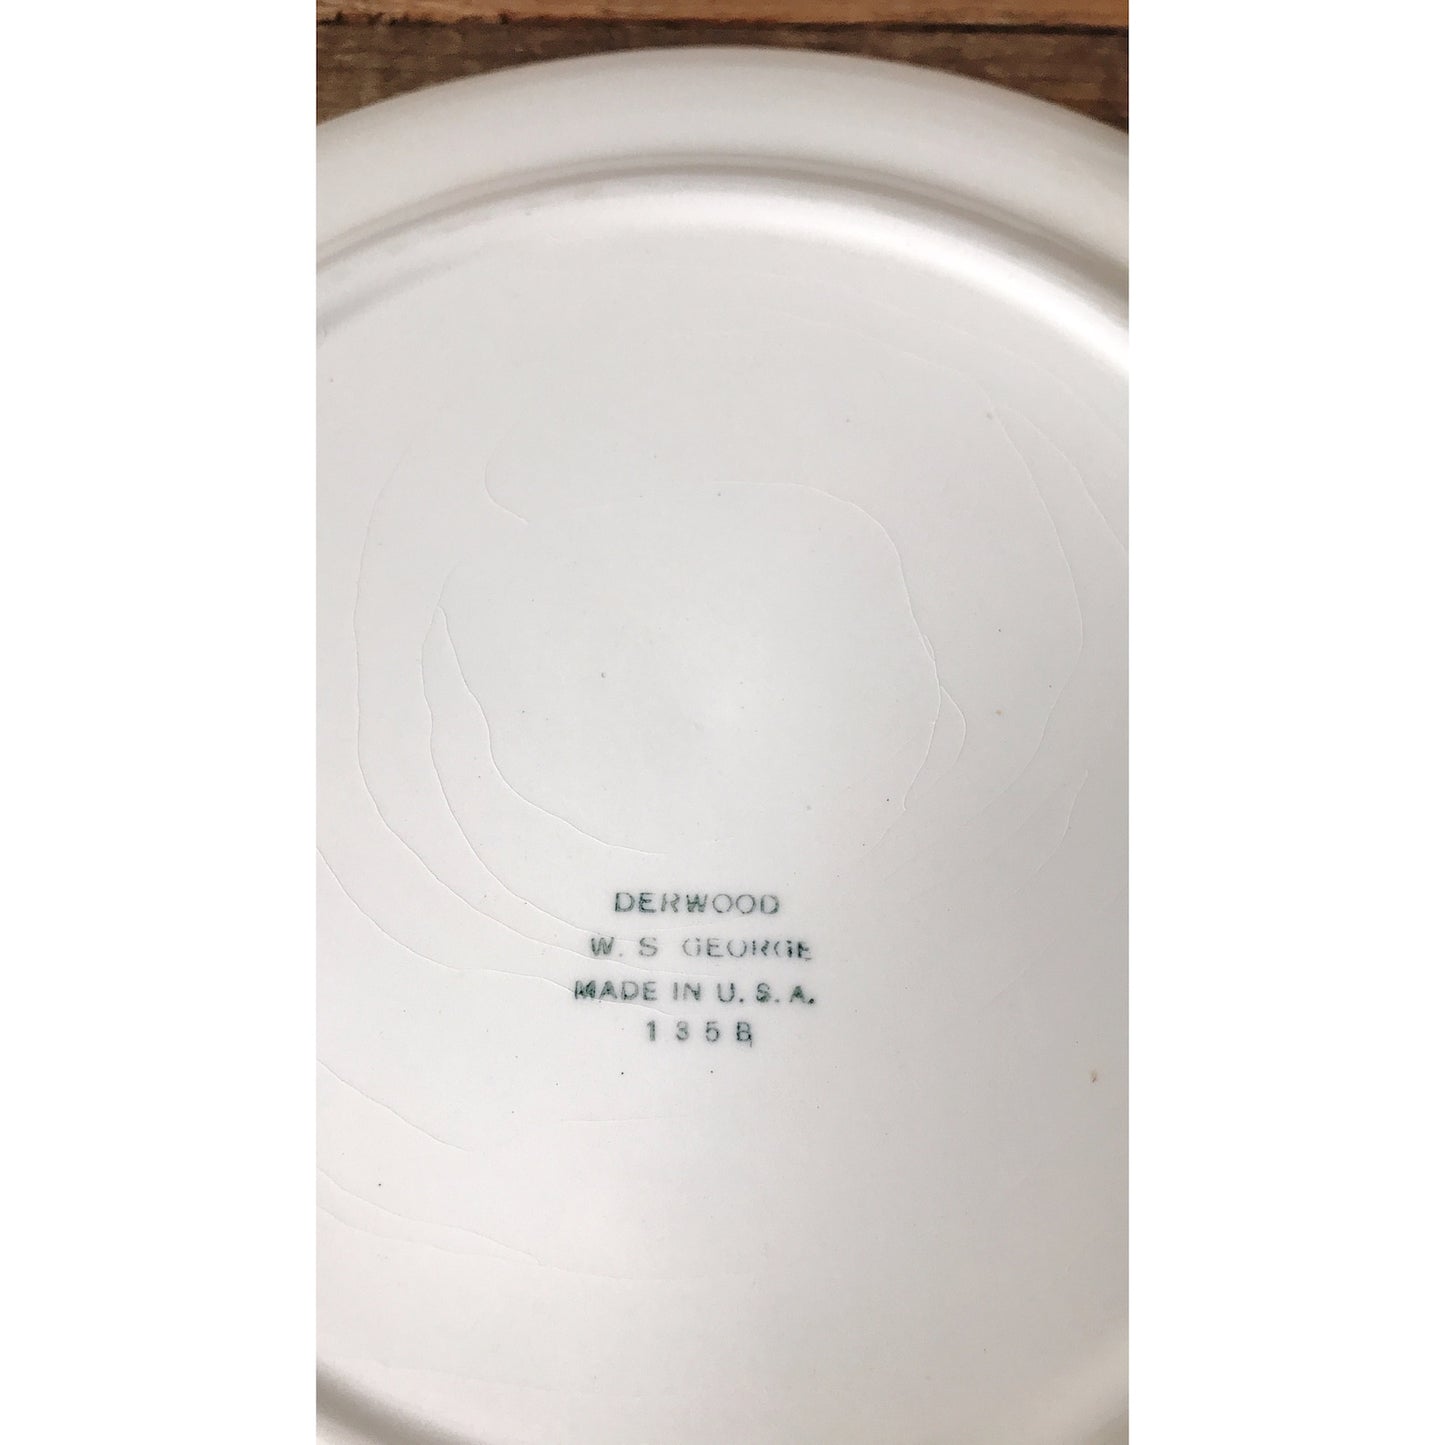 WS George Durwood Luncheon Plate